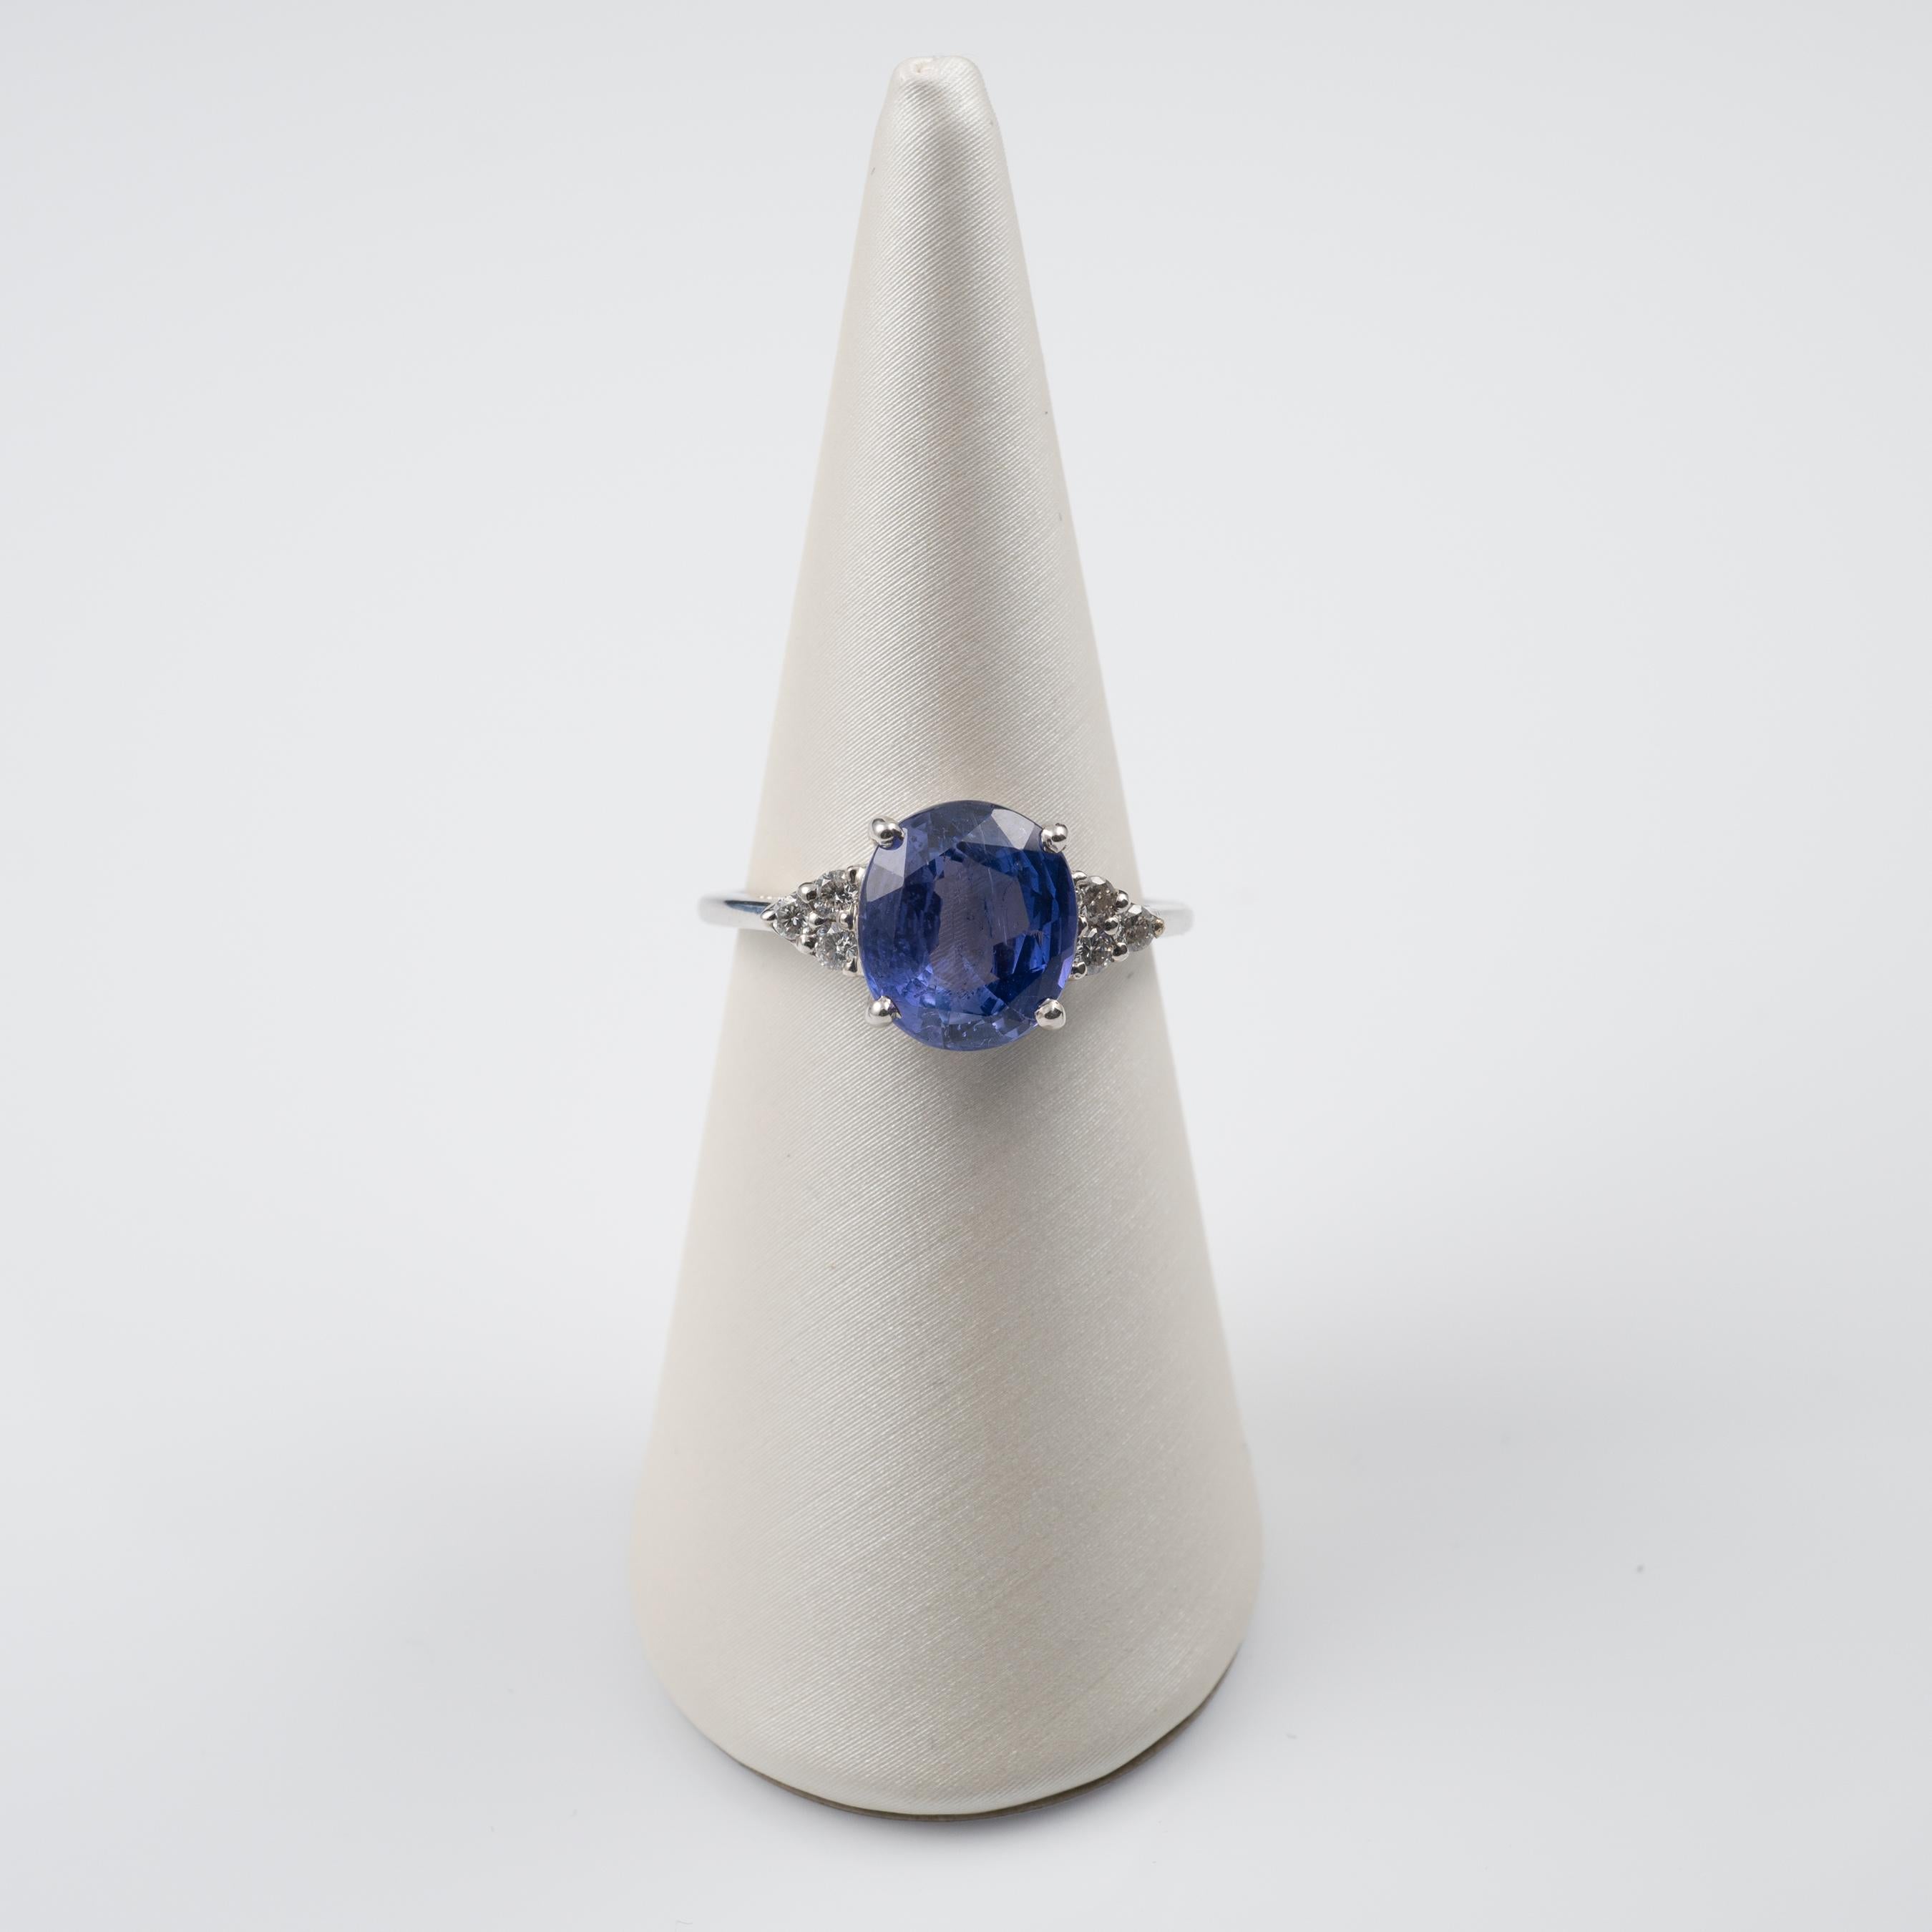 This fabulous and unique natural 3.55-carat blue to violet colour change sapphire and diamond cocktail ring is crafted in 18 karat white gold.

Featuring a colour changing blue to violet sapphire gemstone of 3.55 carats with a triangular cluster of